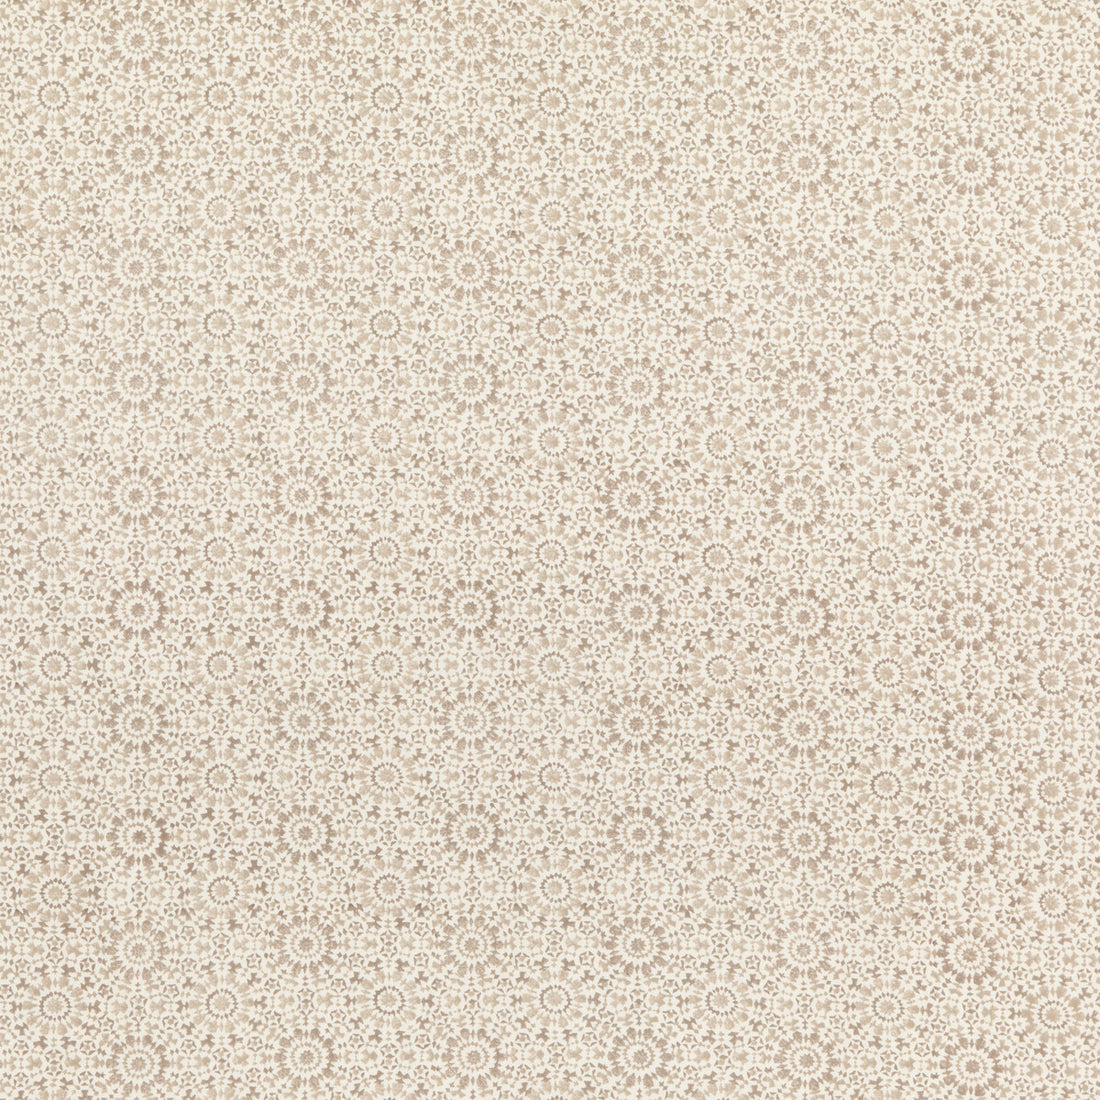 Veryan fabric in warm grey color - pattern BP10792.3.0 - by G P &amp; J Baker in the Artisan II collection